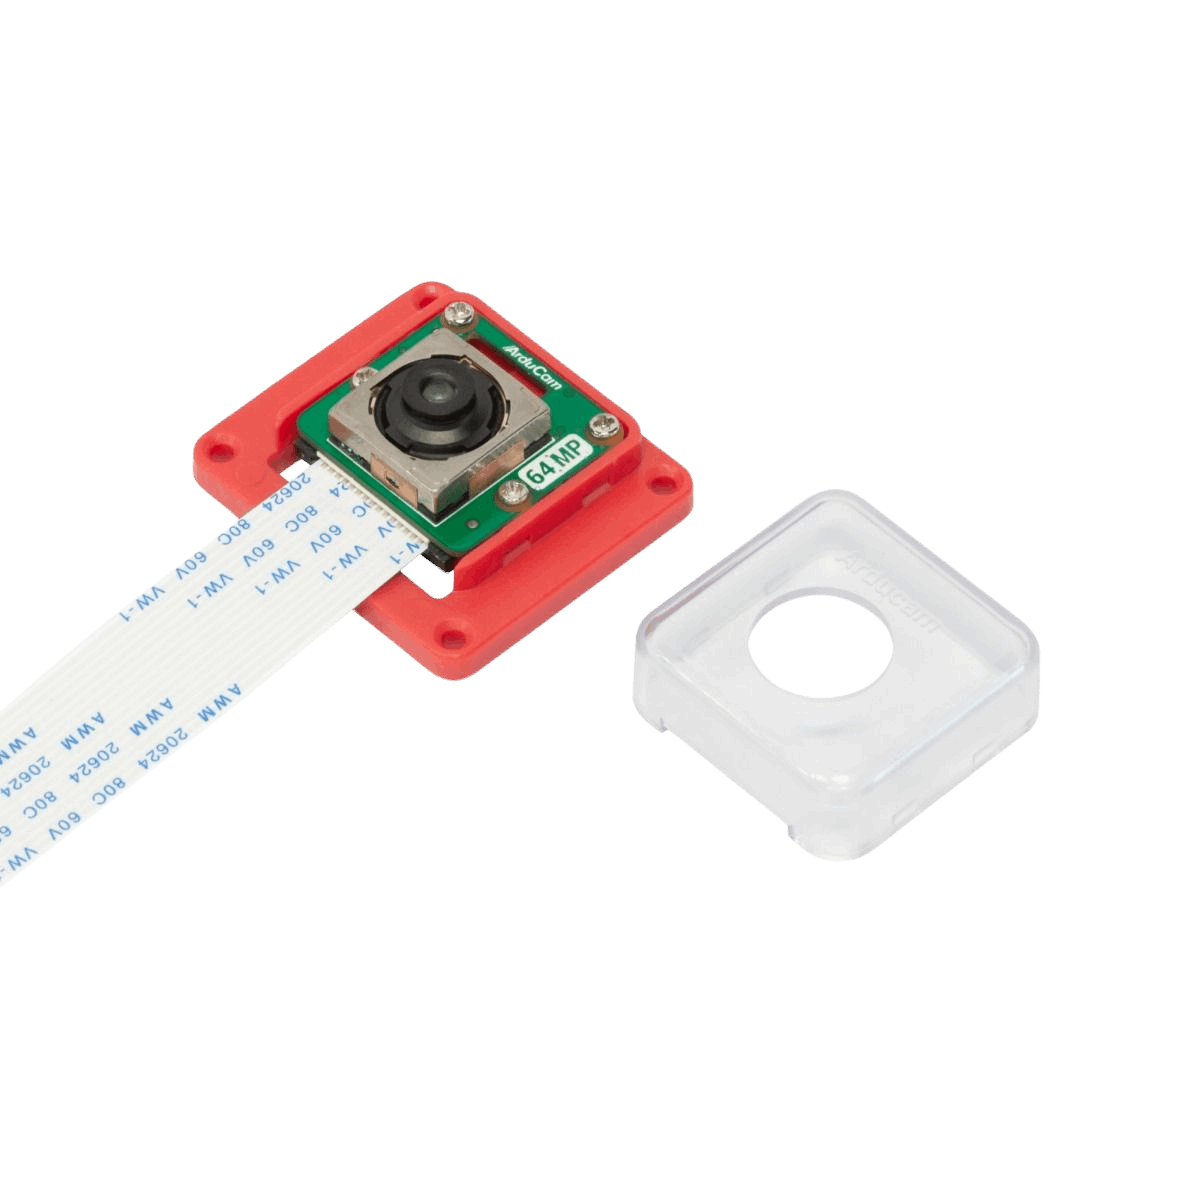 Arducam 64MP OwlSight B0483 product image with case separated